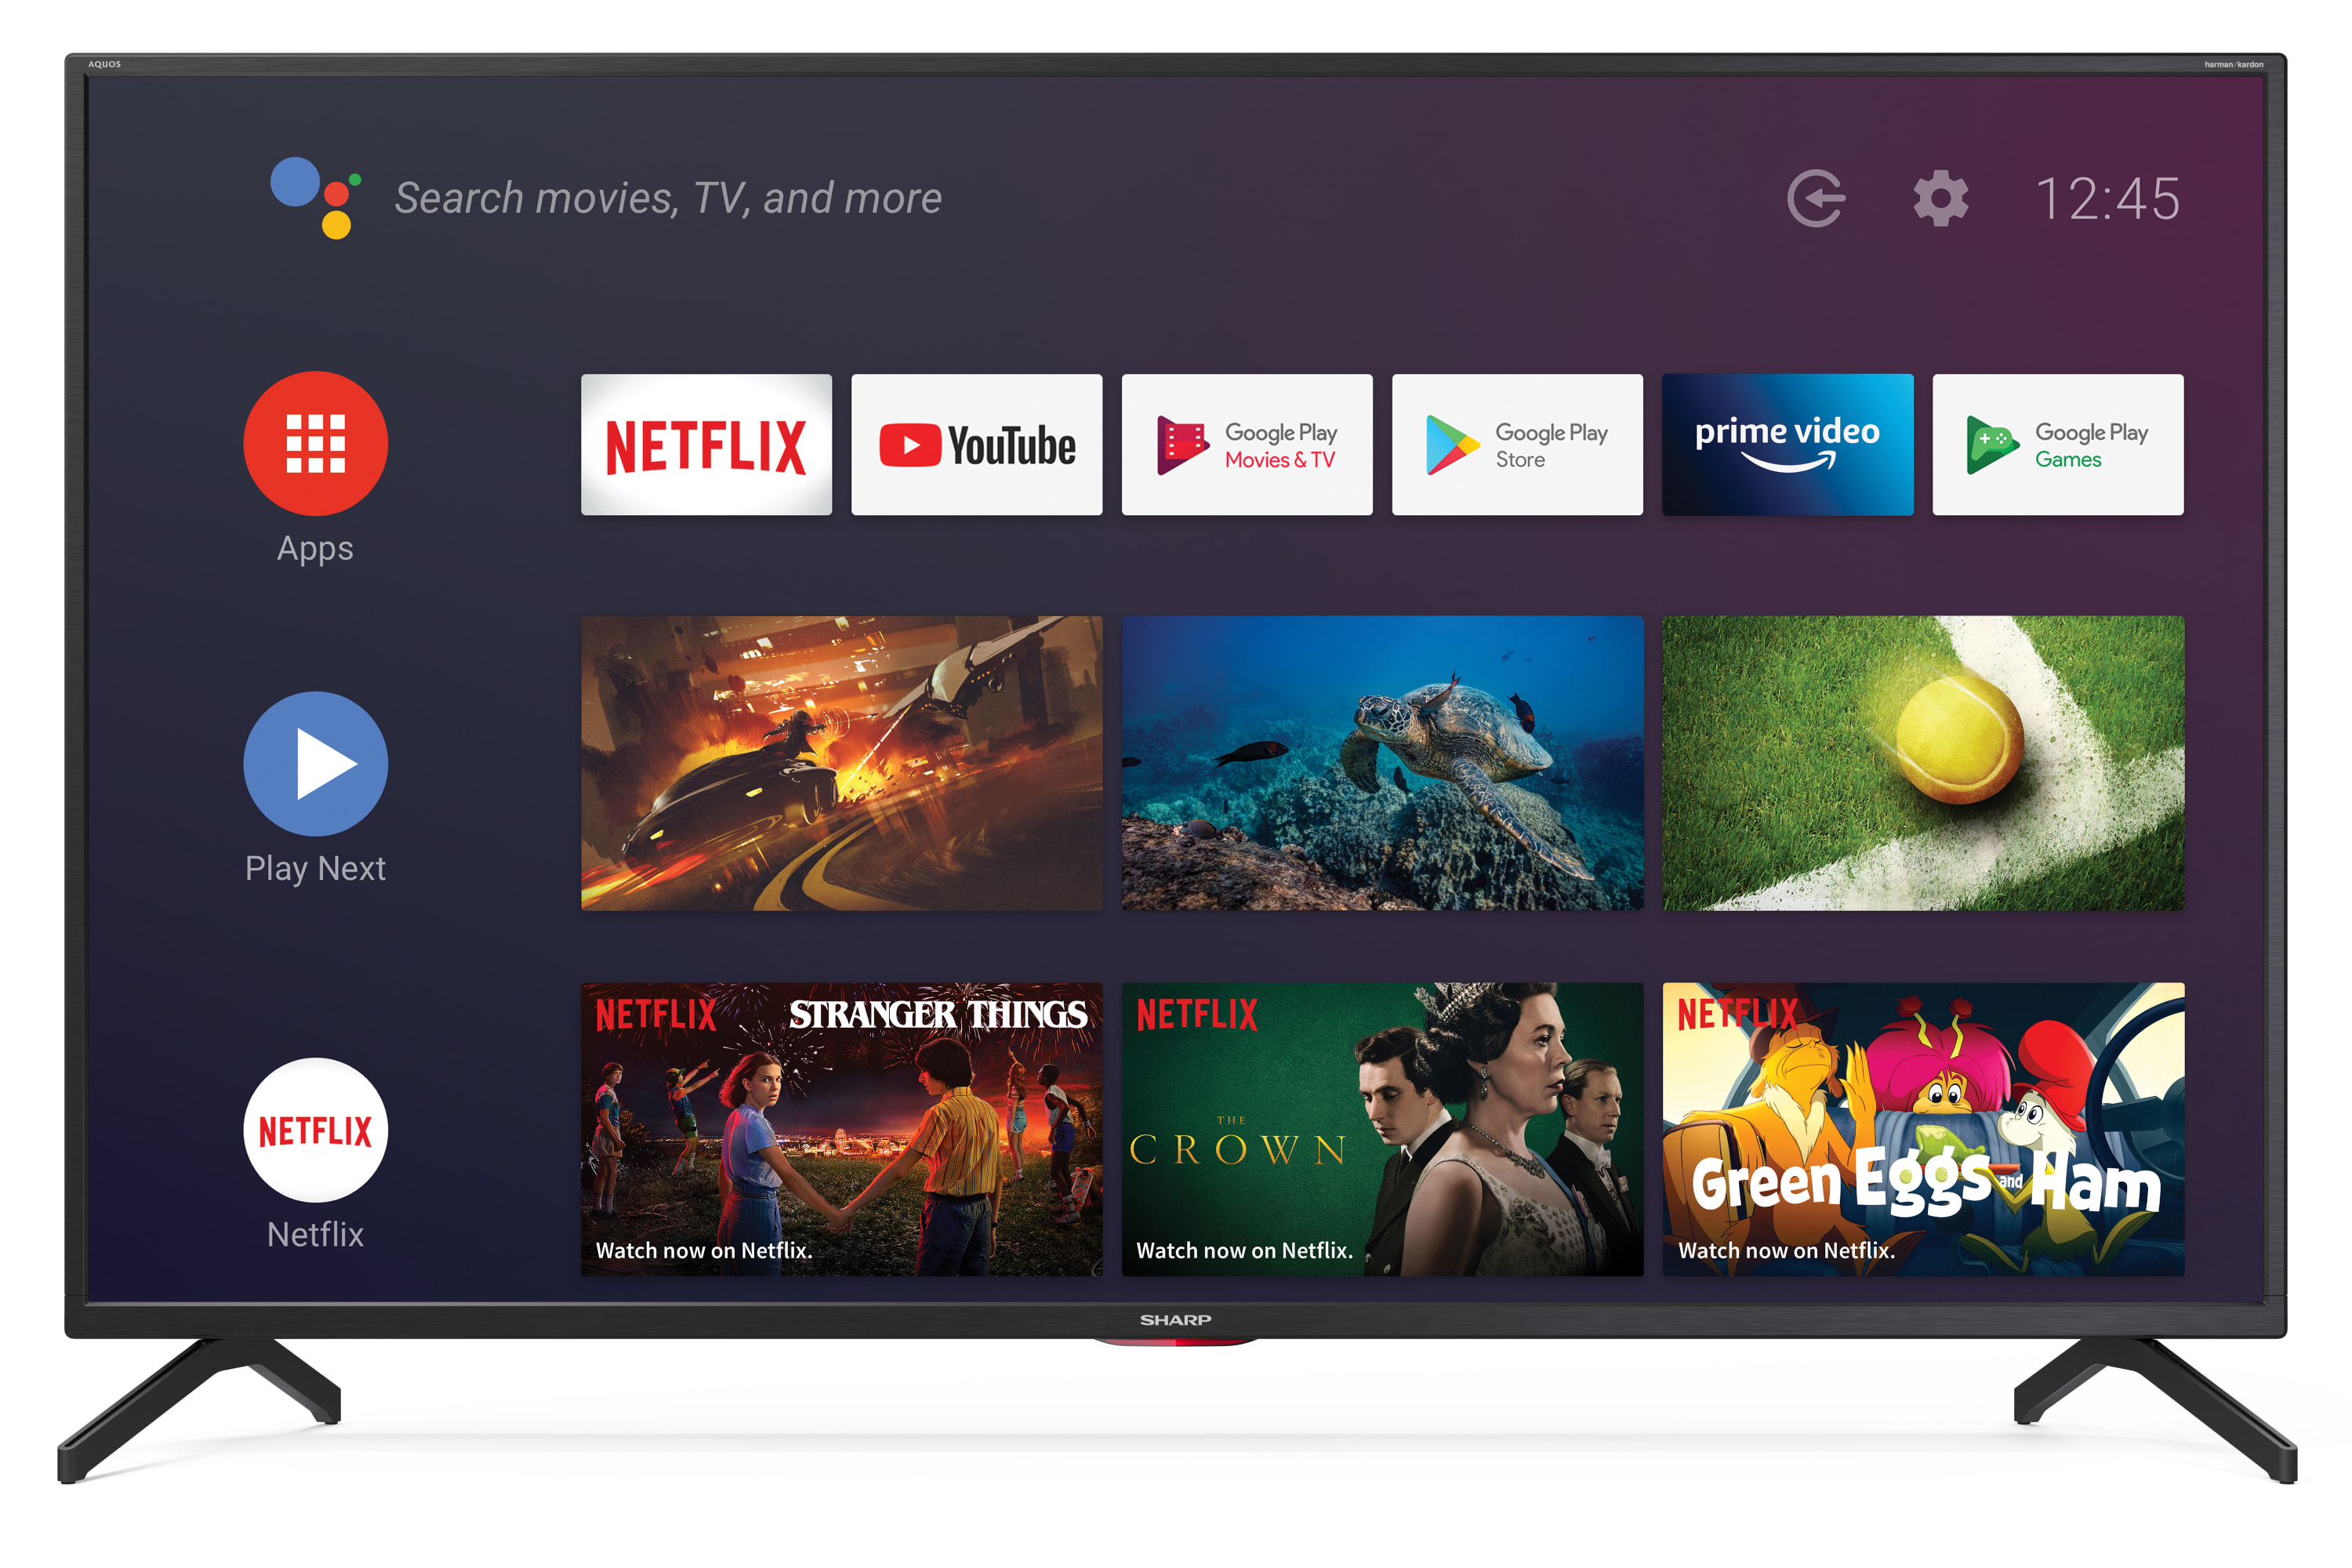 Android TV 4K UHD - ANDROID TV™ 4K HD DA 55"